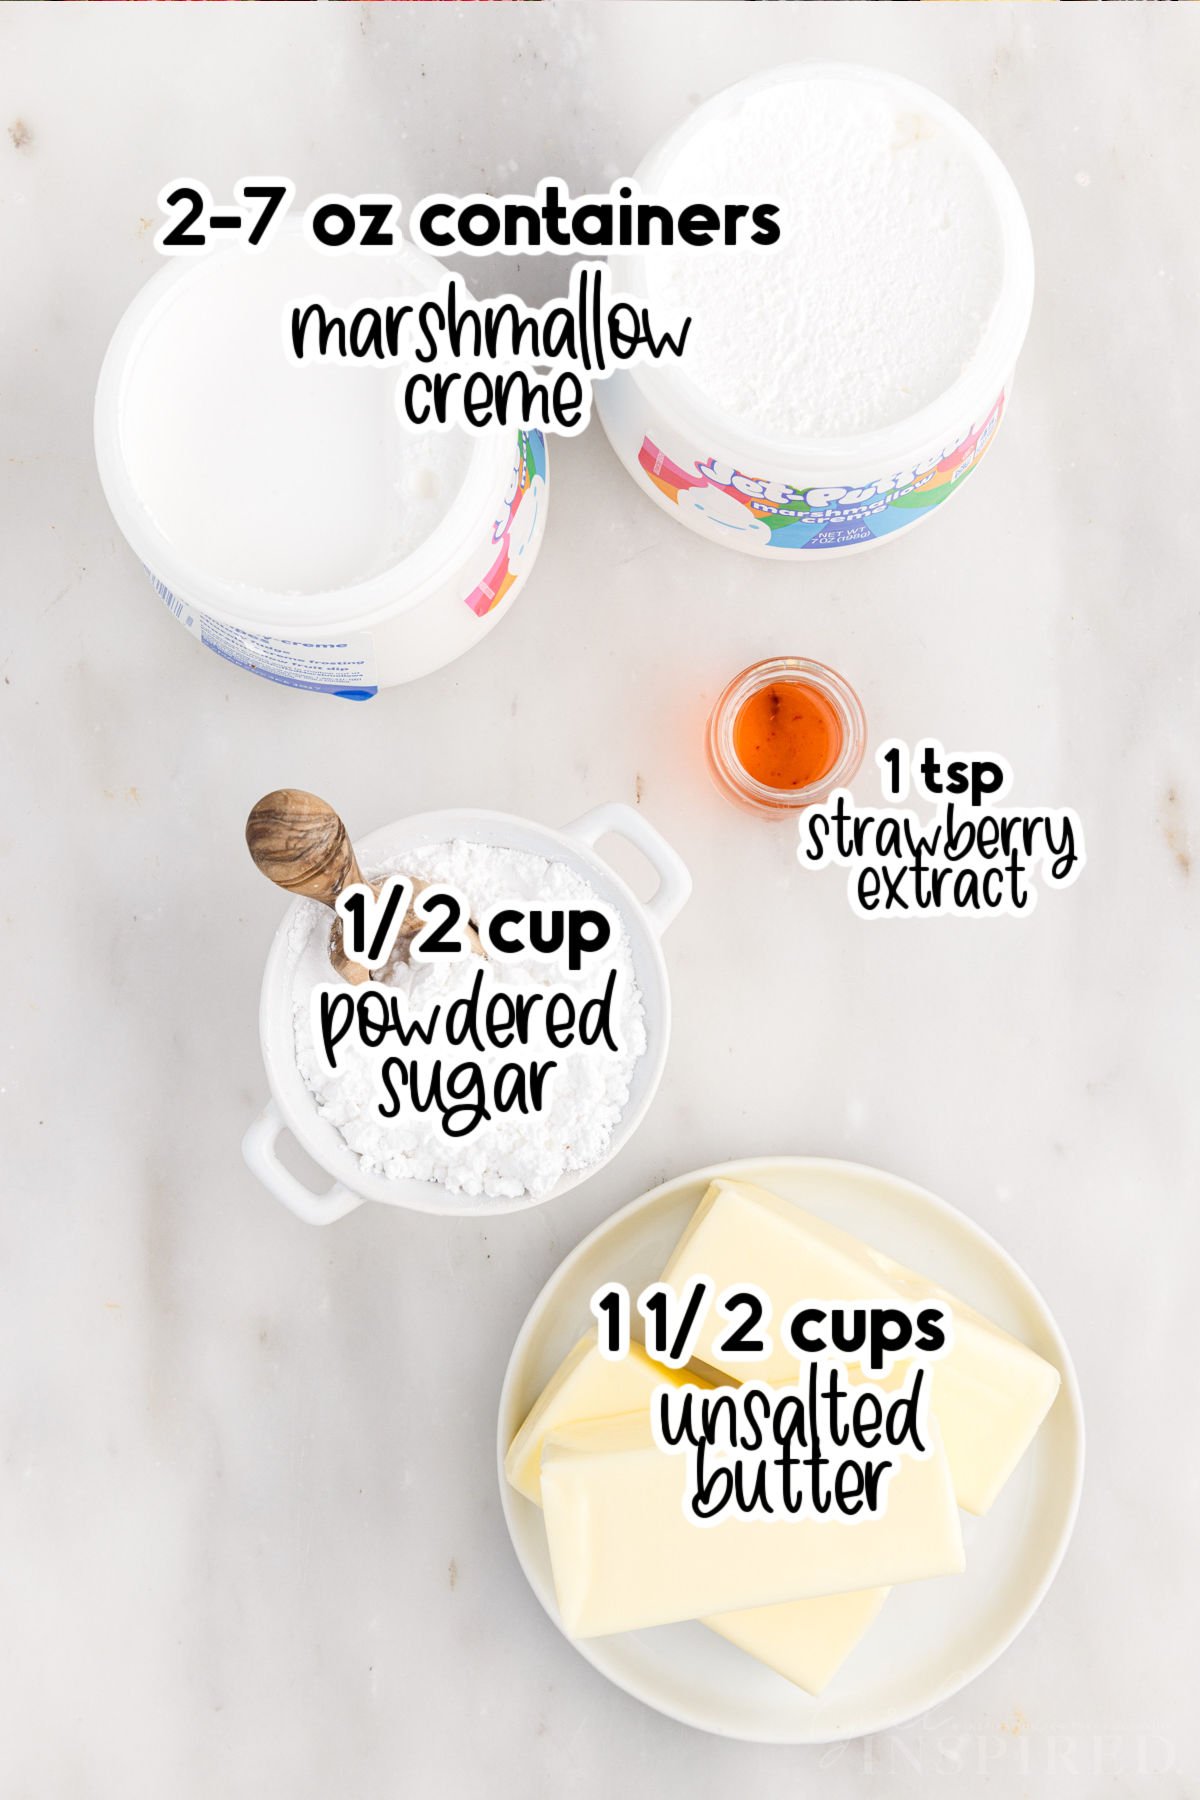 Individual ingredients for strawberry frosting - containers of marshmallow creme, powdered sugar, butter, strawberry extract with text labels.